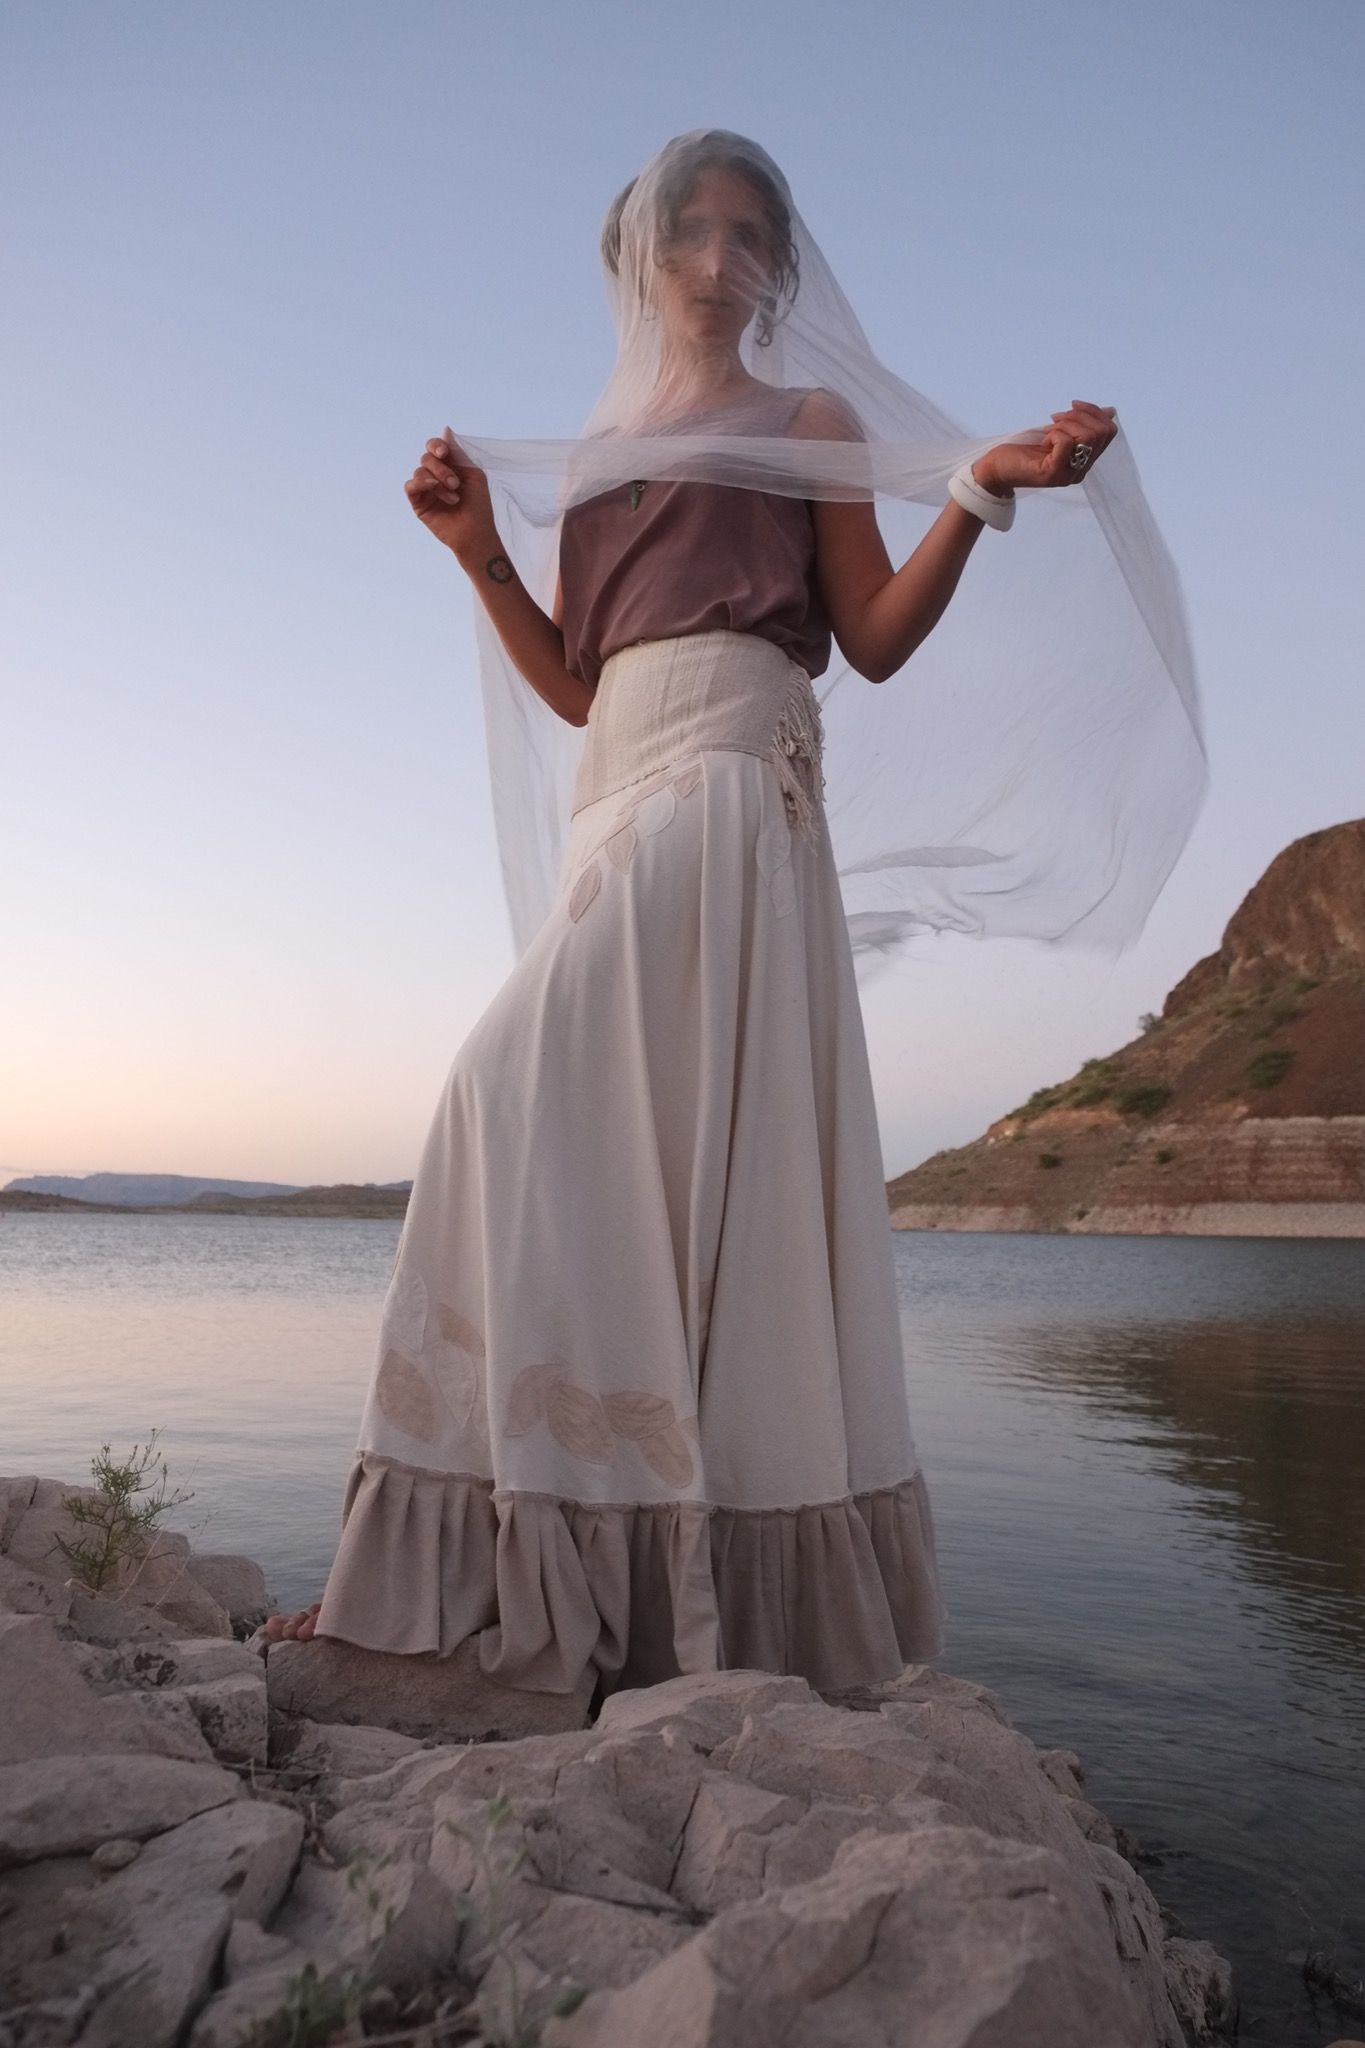 woman wearing white wedding skirt with thin veil by a still lake at sunset